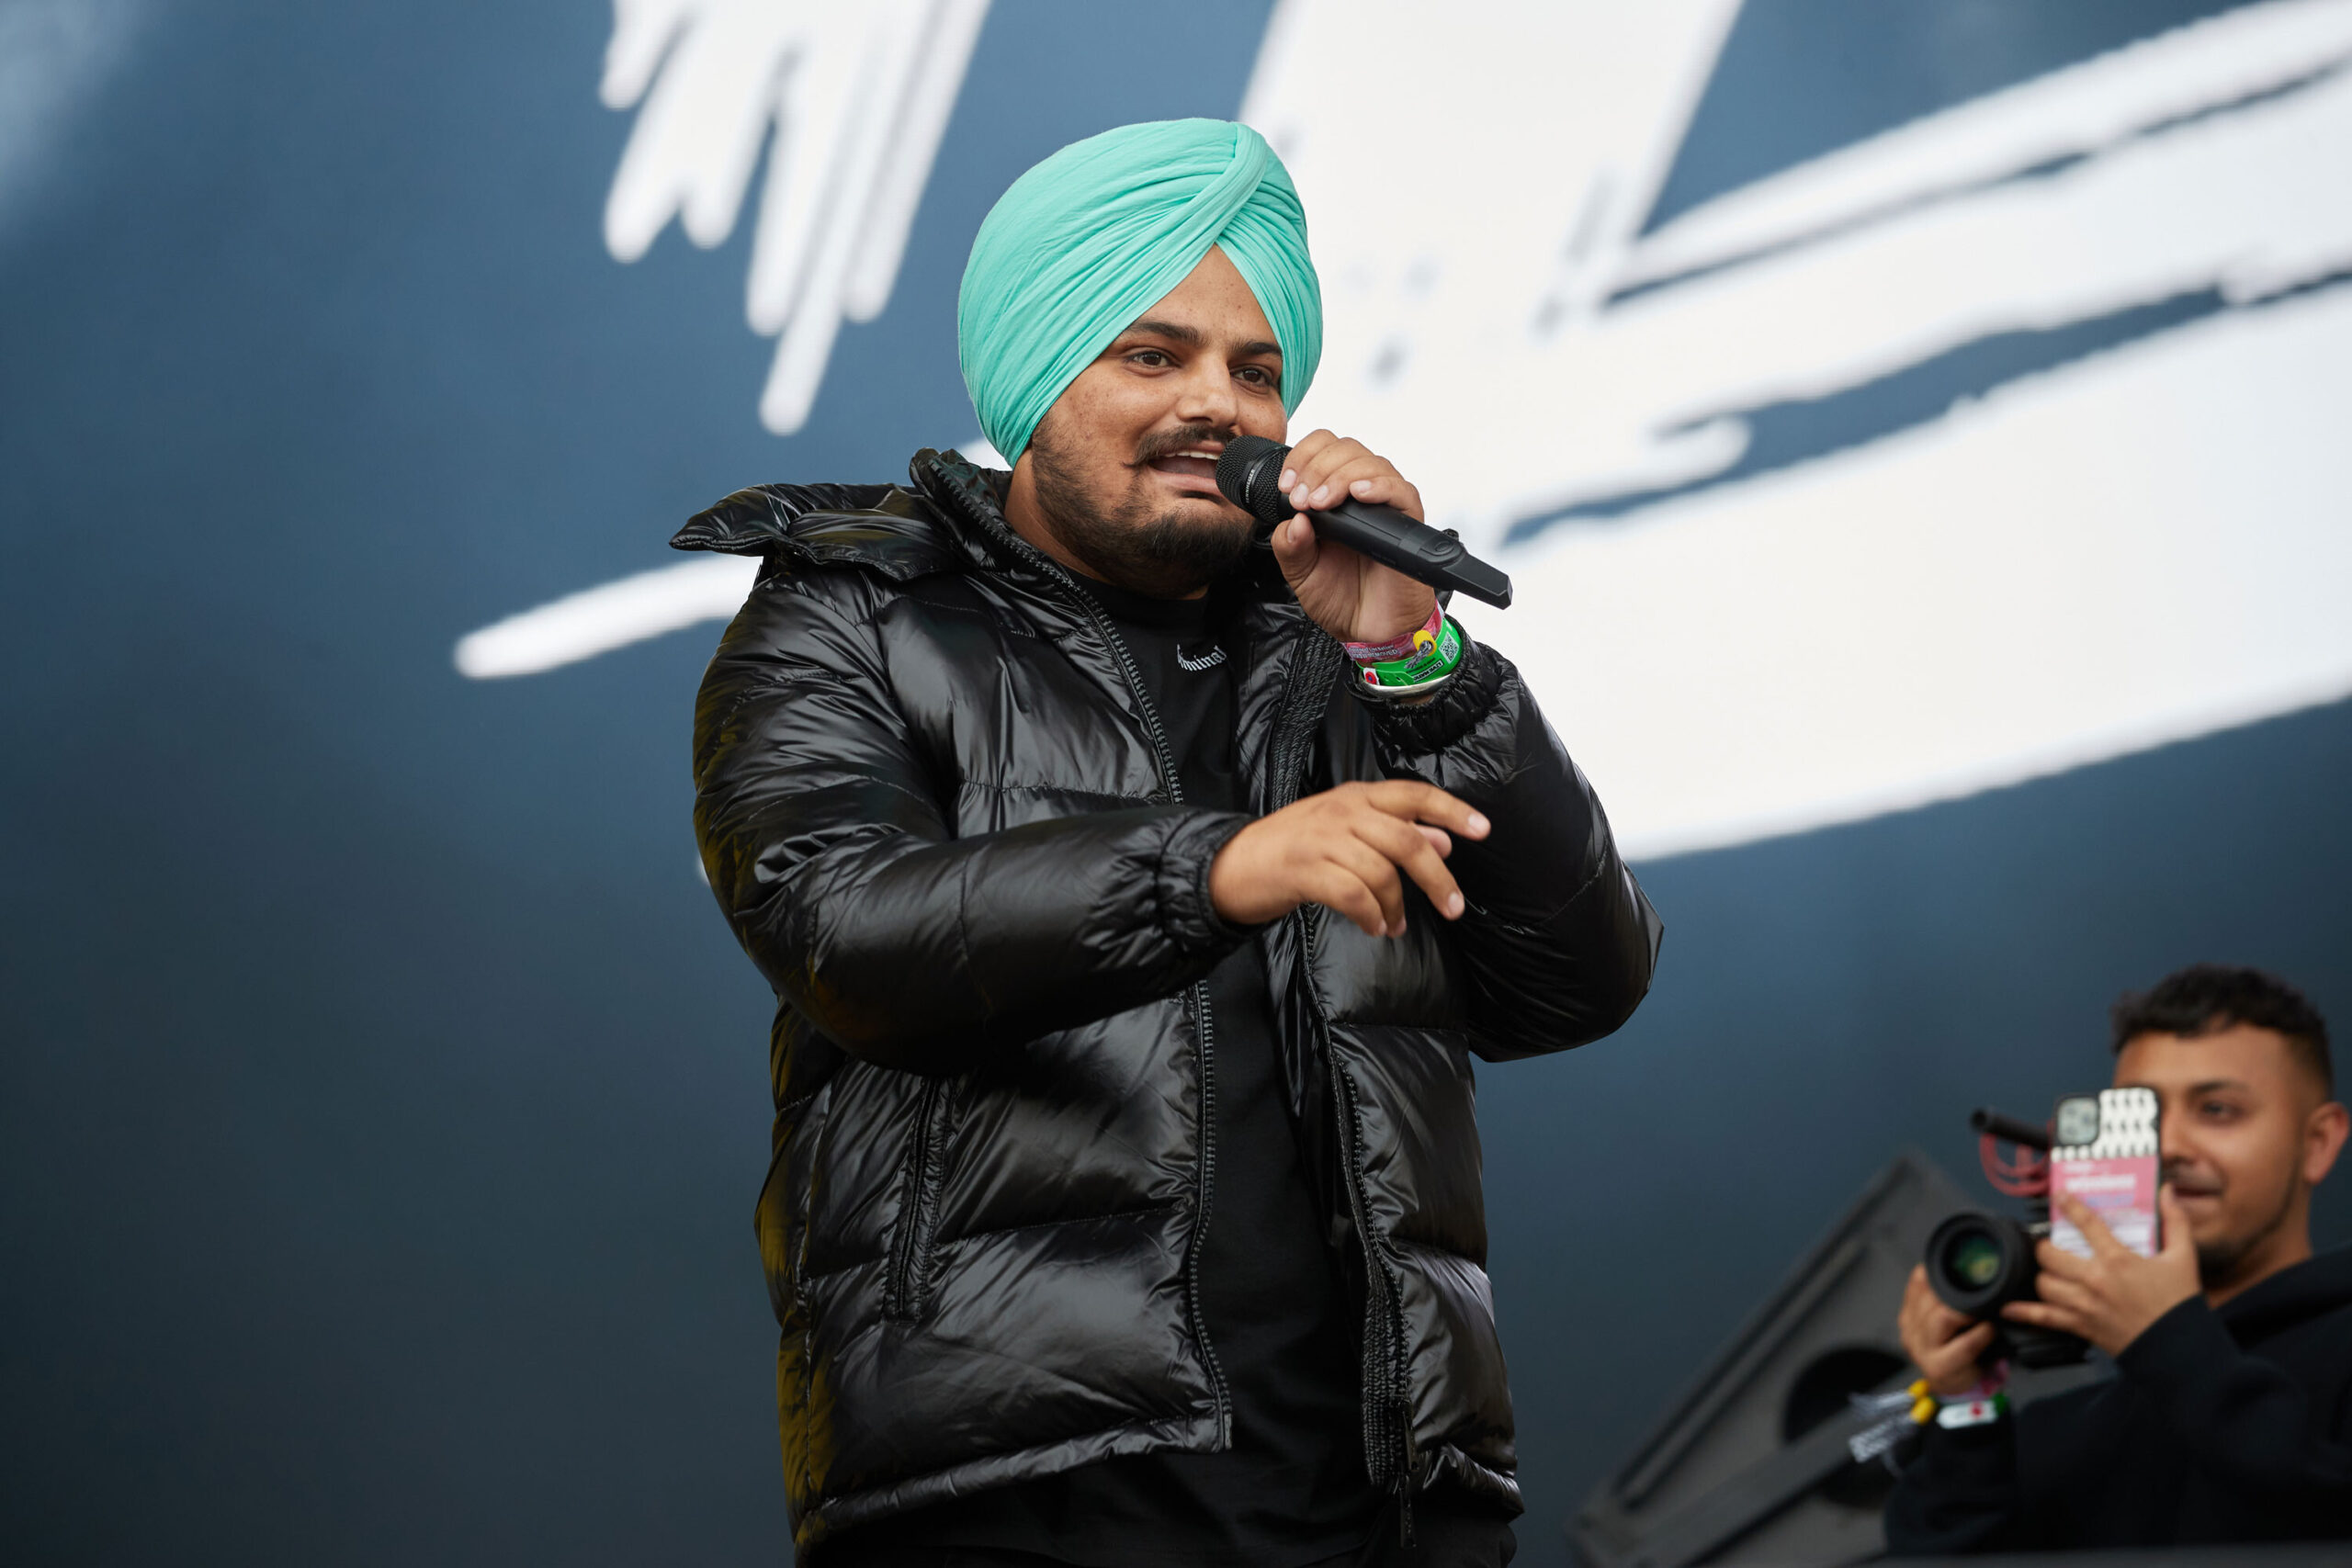 <i>Burak Cingi/Redferns/Getty Images</i><br/>Sidhu Moose Wala performs at the Wireless Festival 2021 at Crystal Palace in London. The rapper was shot by unidentified assailants near his home in the Mansa district of India's Punjab state on Sunday.